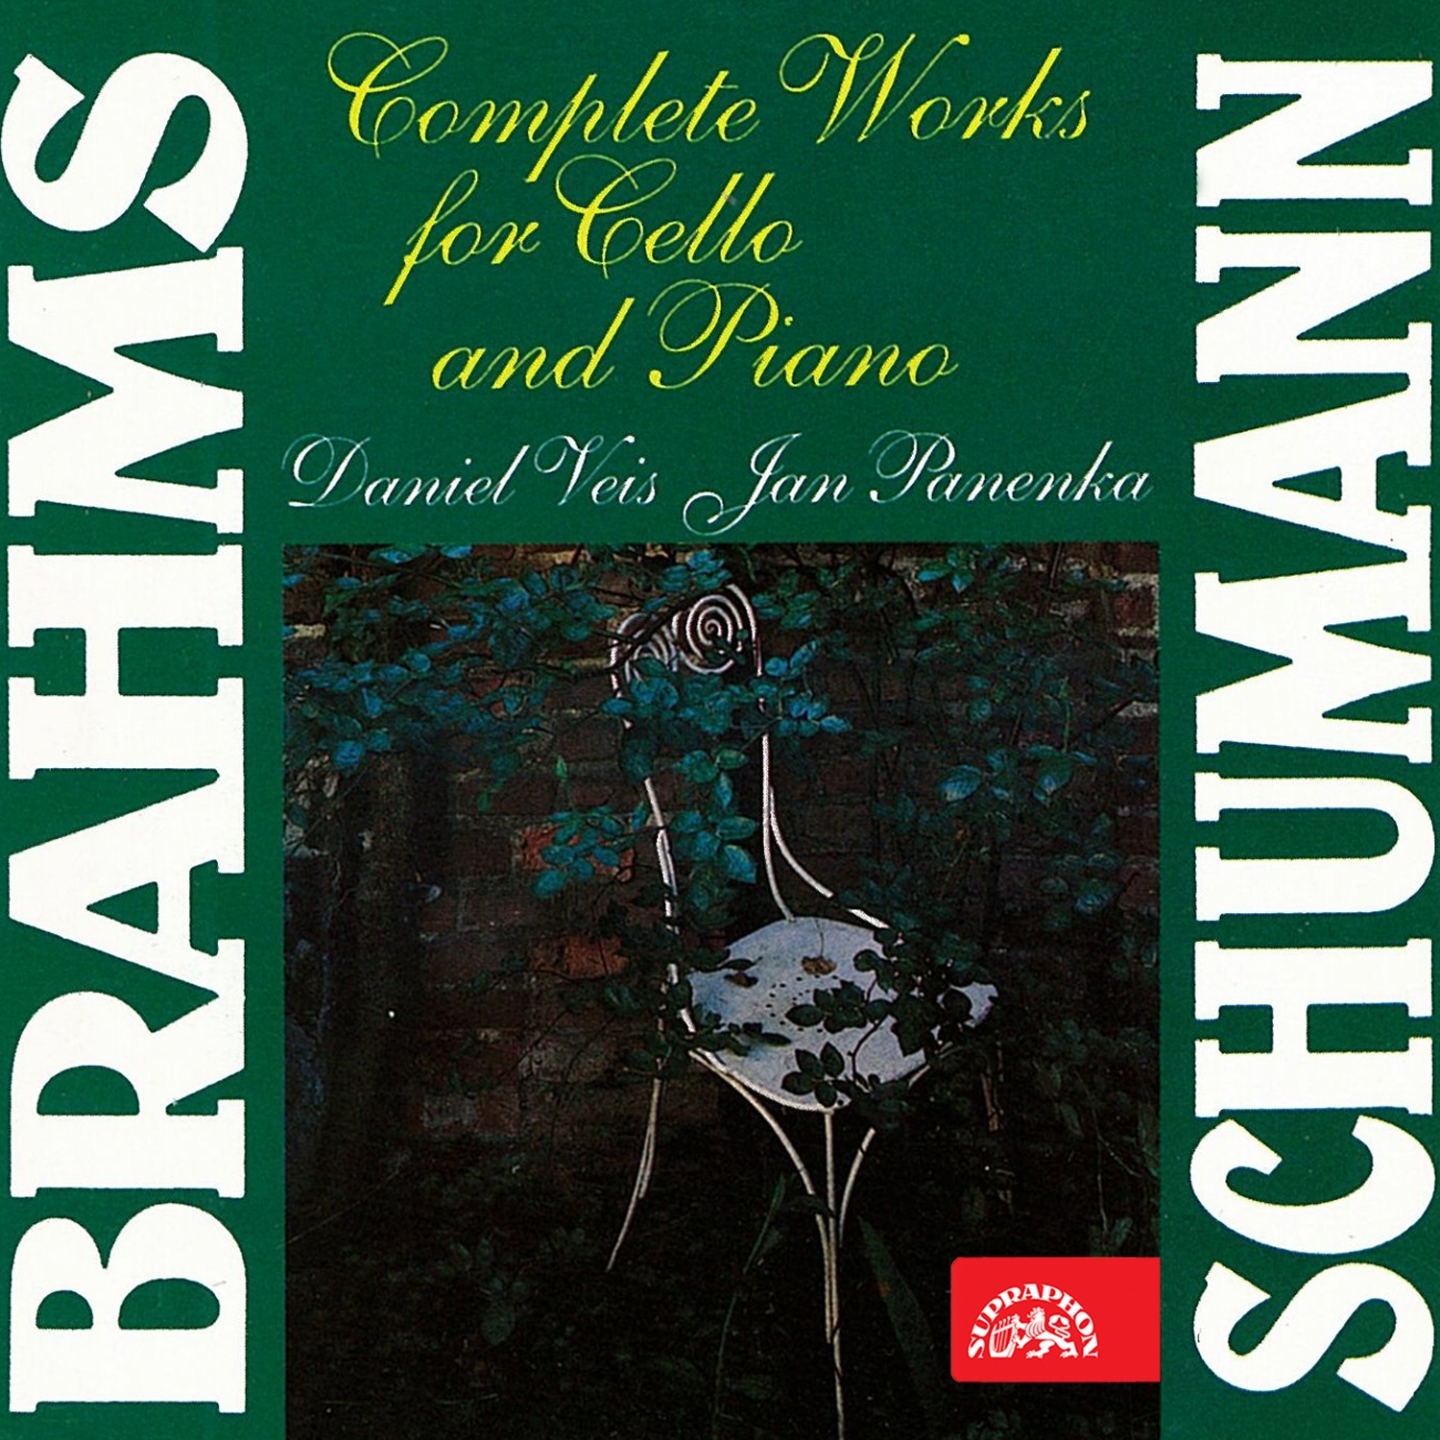 Brahms, Schumann: Complete Works for Cello and Piano